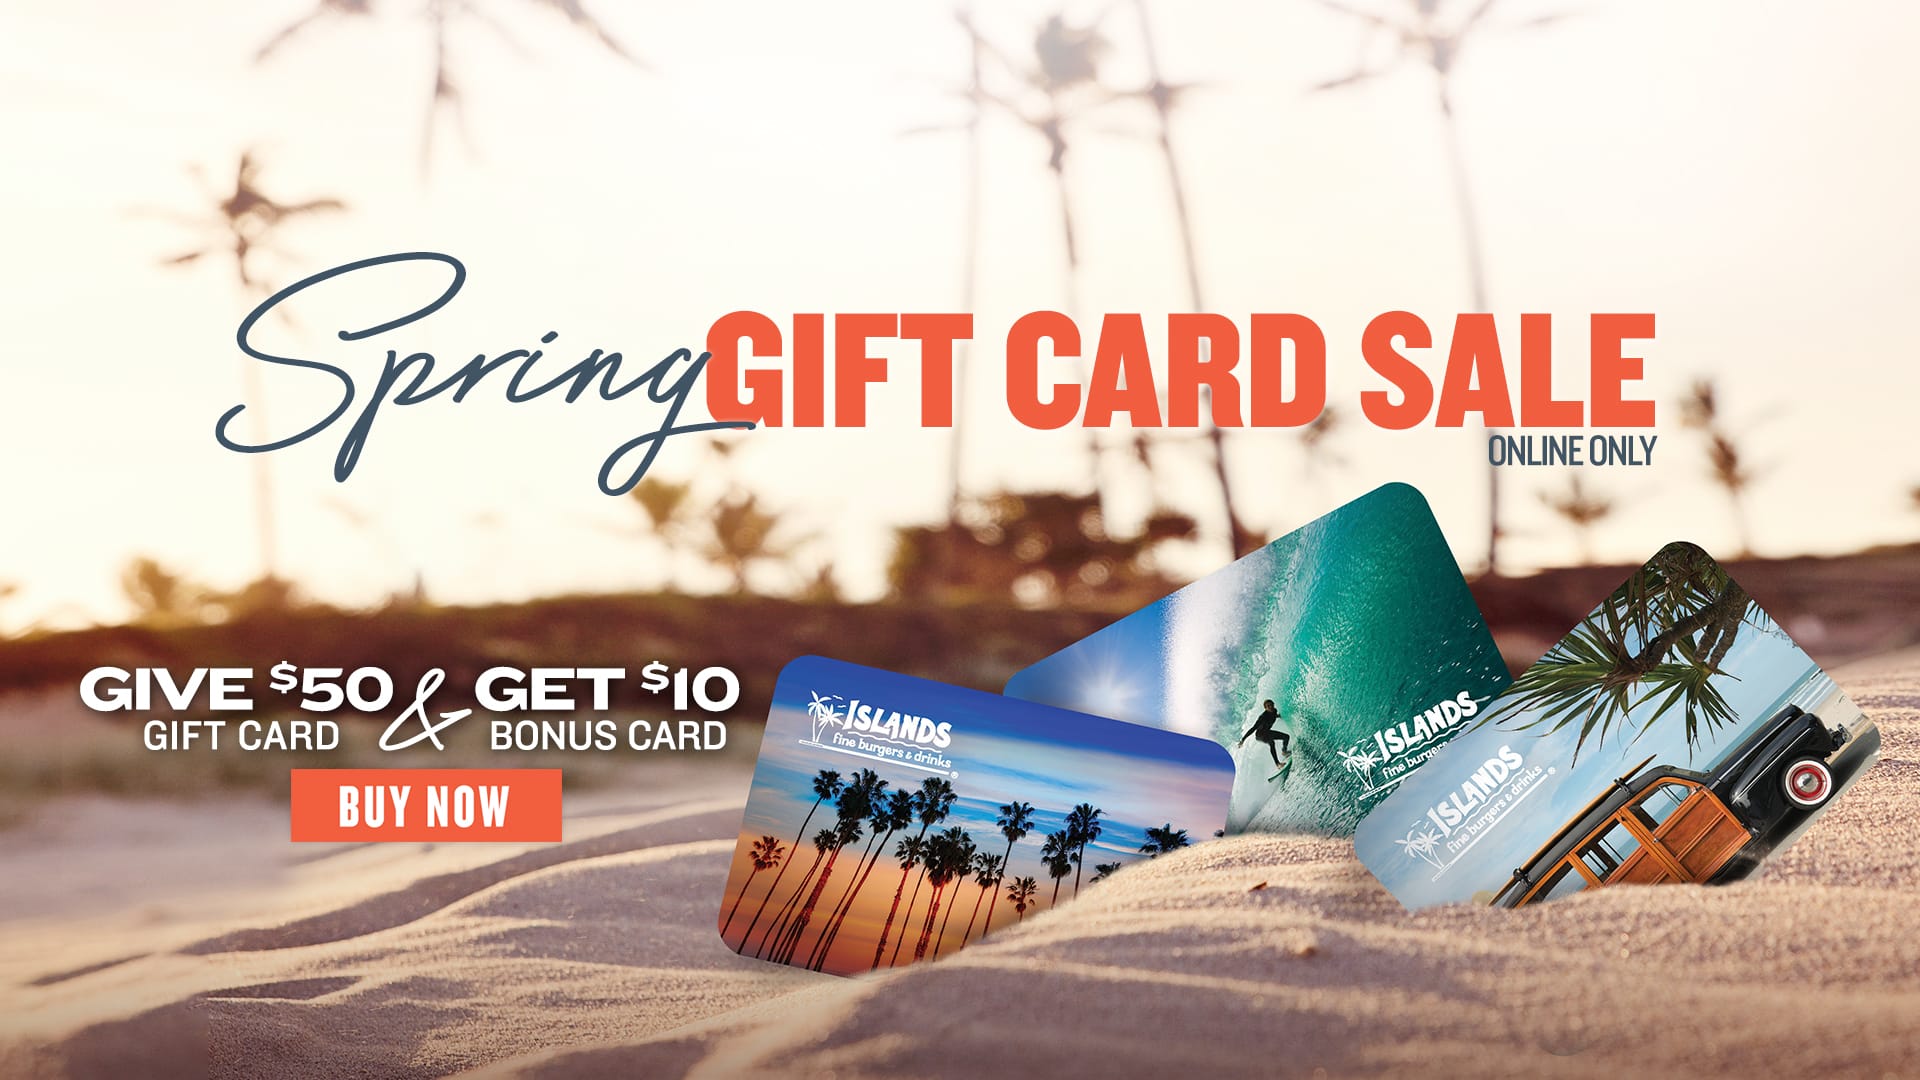 Spring Gift Card Sale - Online Only - Give $50 Gift Card and Get $10 Bonus Card - Buy Now